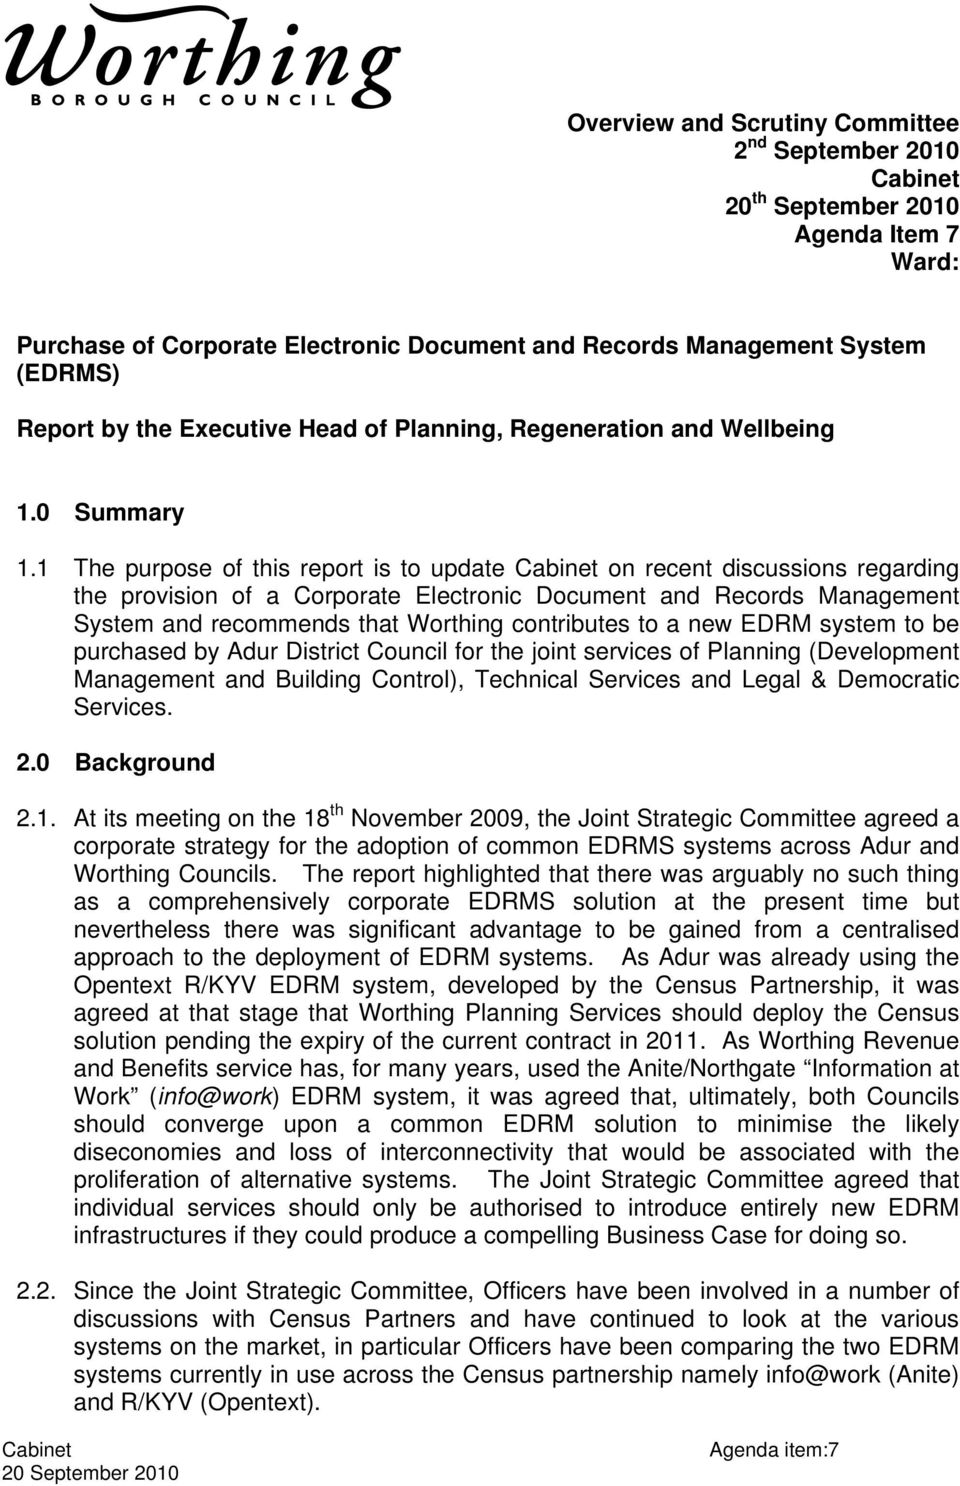 1 The purpose of this report is to update on recent discussions regarding the provision of a Corporate Electronic Document and Records Management System and recommends that Worthing contributes to a